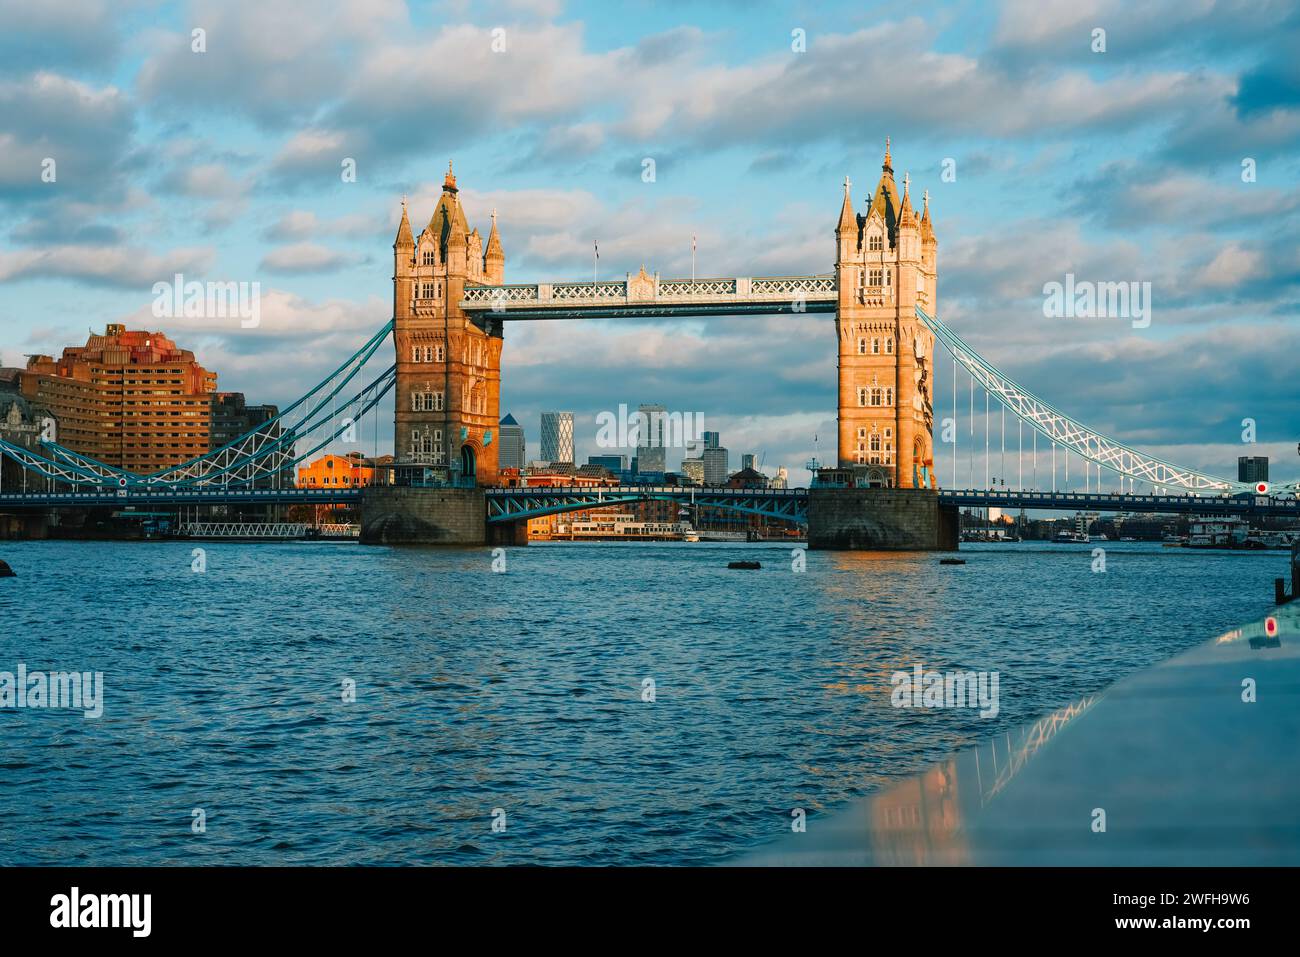 The historic Tower Bridge spanning over calm waters  in London, UK Stock Photo